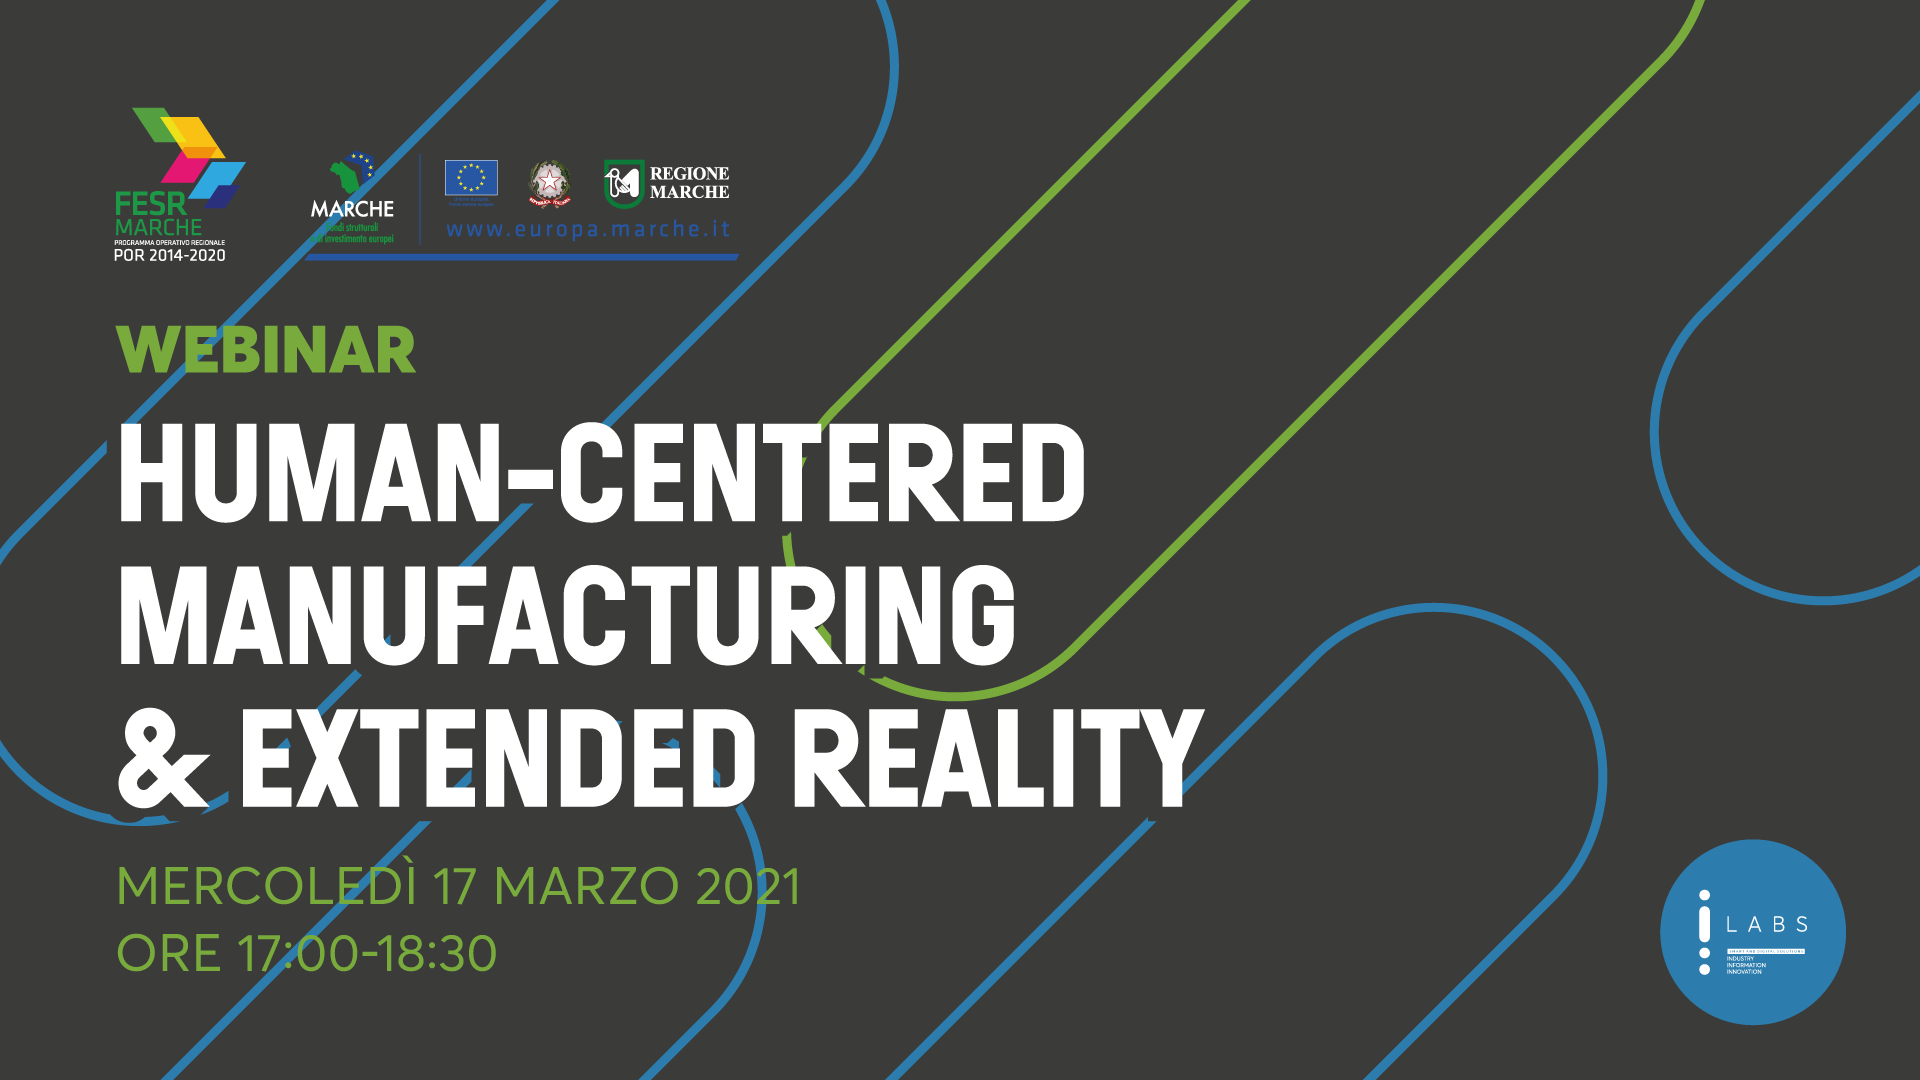 HUMAN-CENTERED MANUFACTURING & EXTENDED REALITY